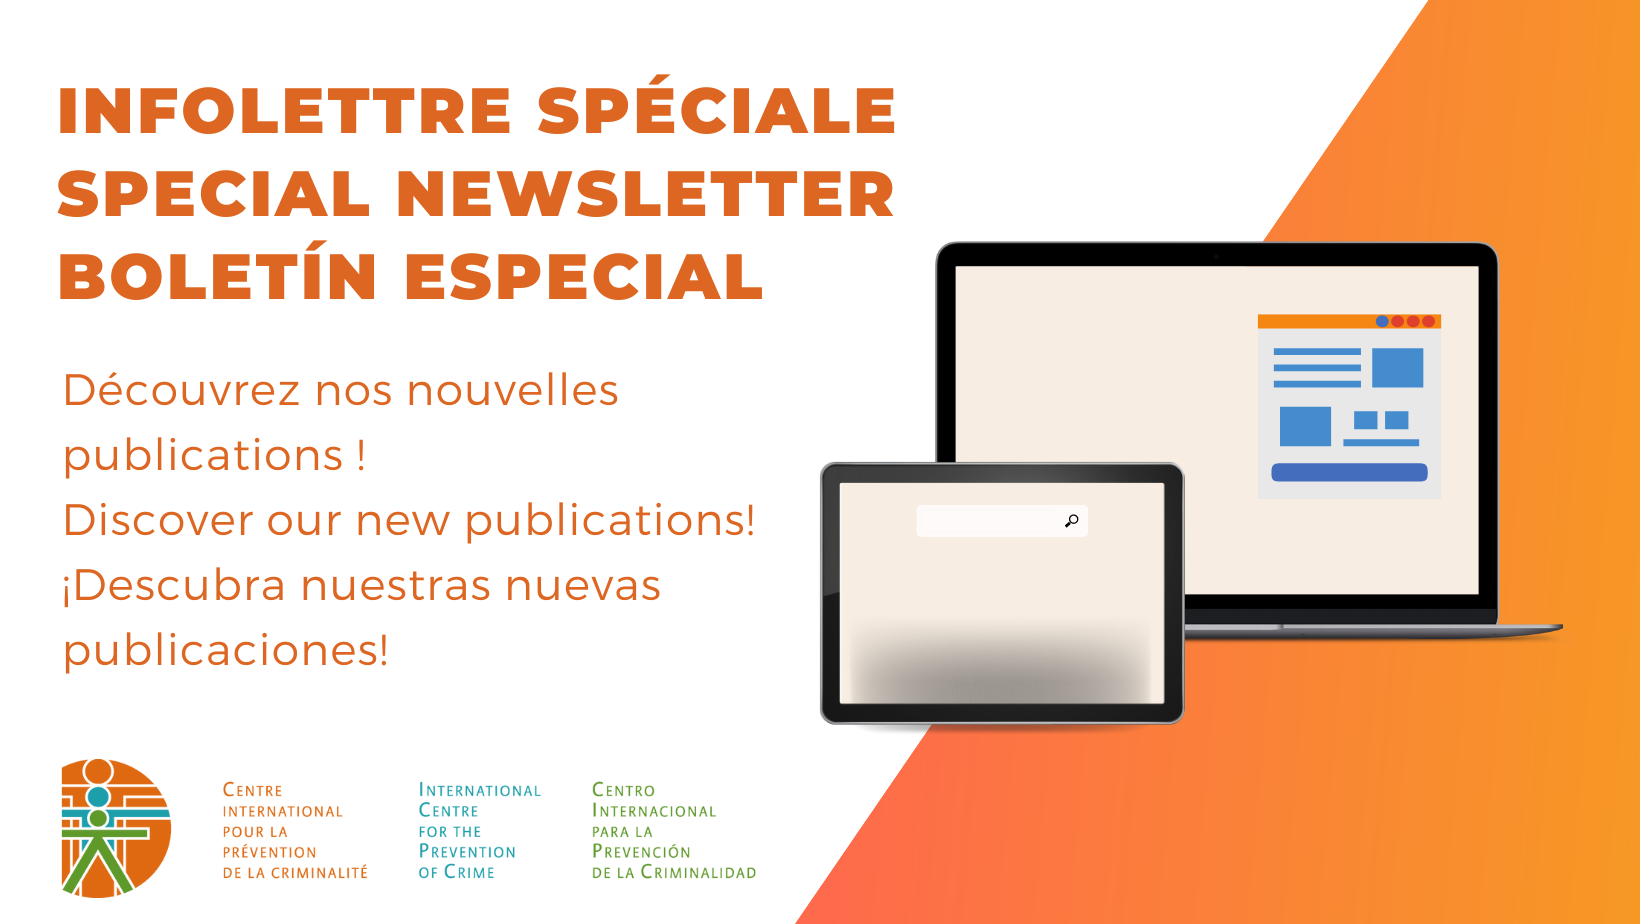 Our special publications newsletter is now available!